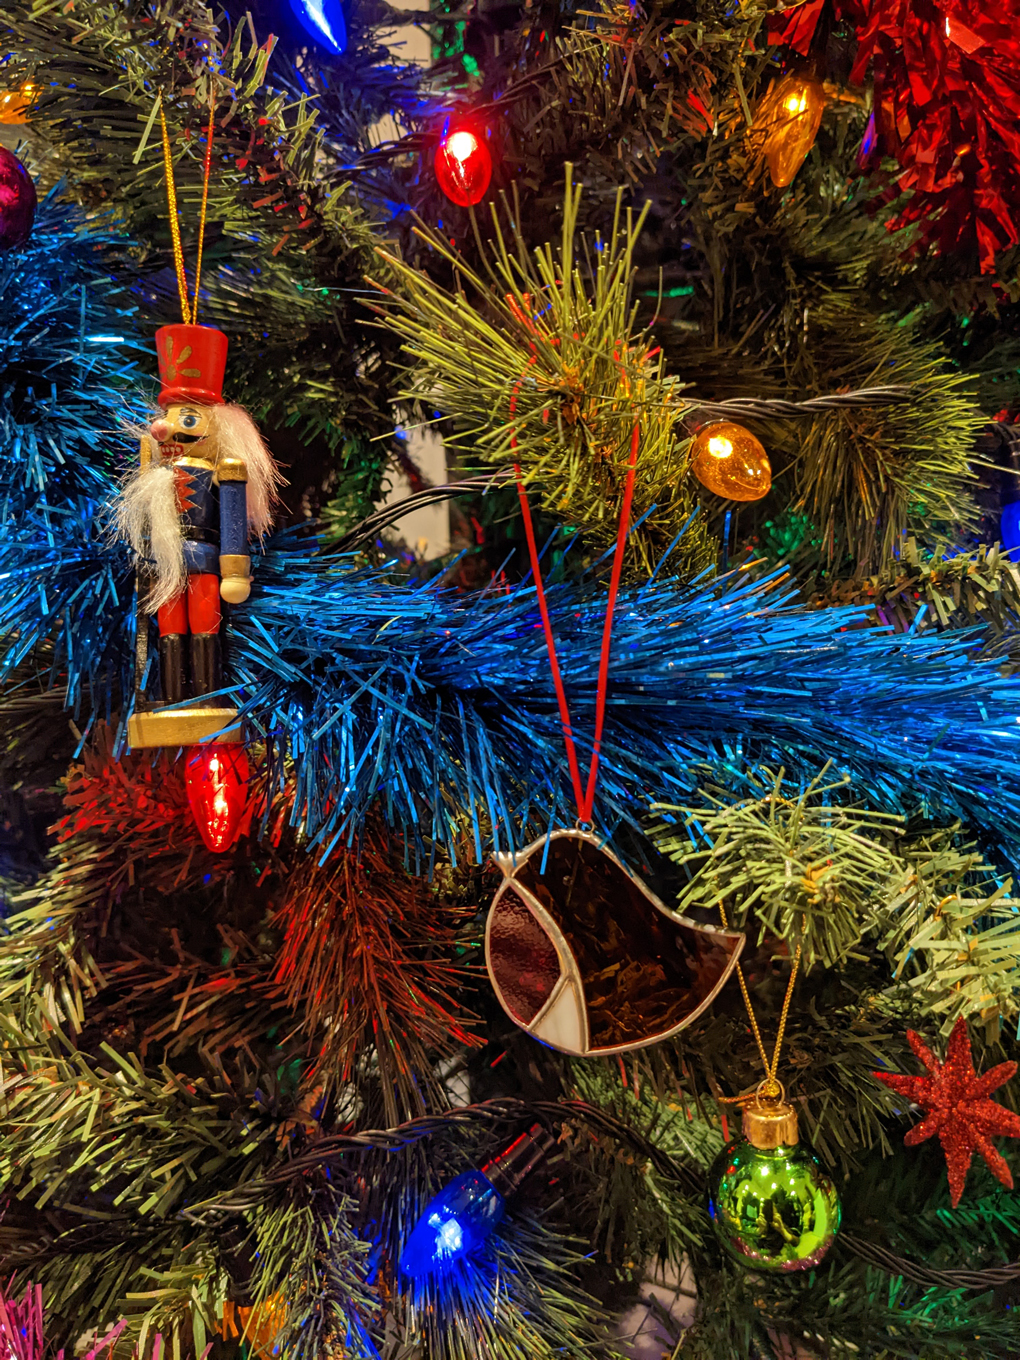 Decorations hanging from a Christmas tree